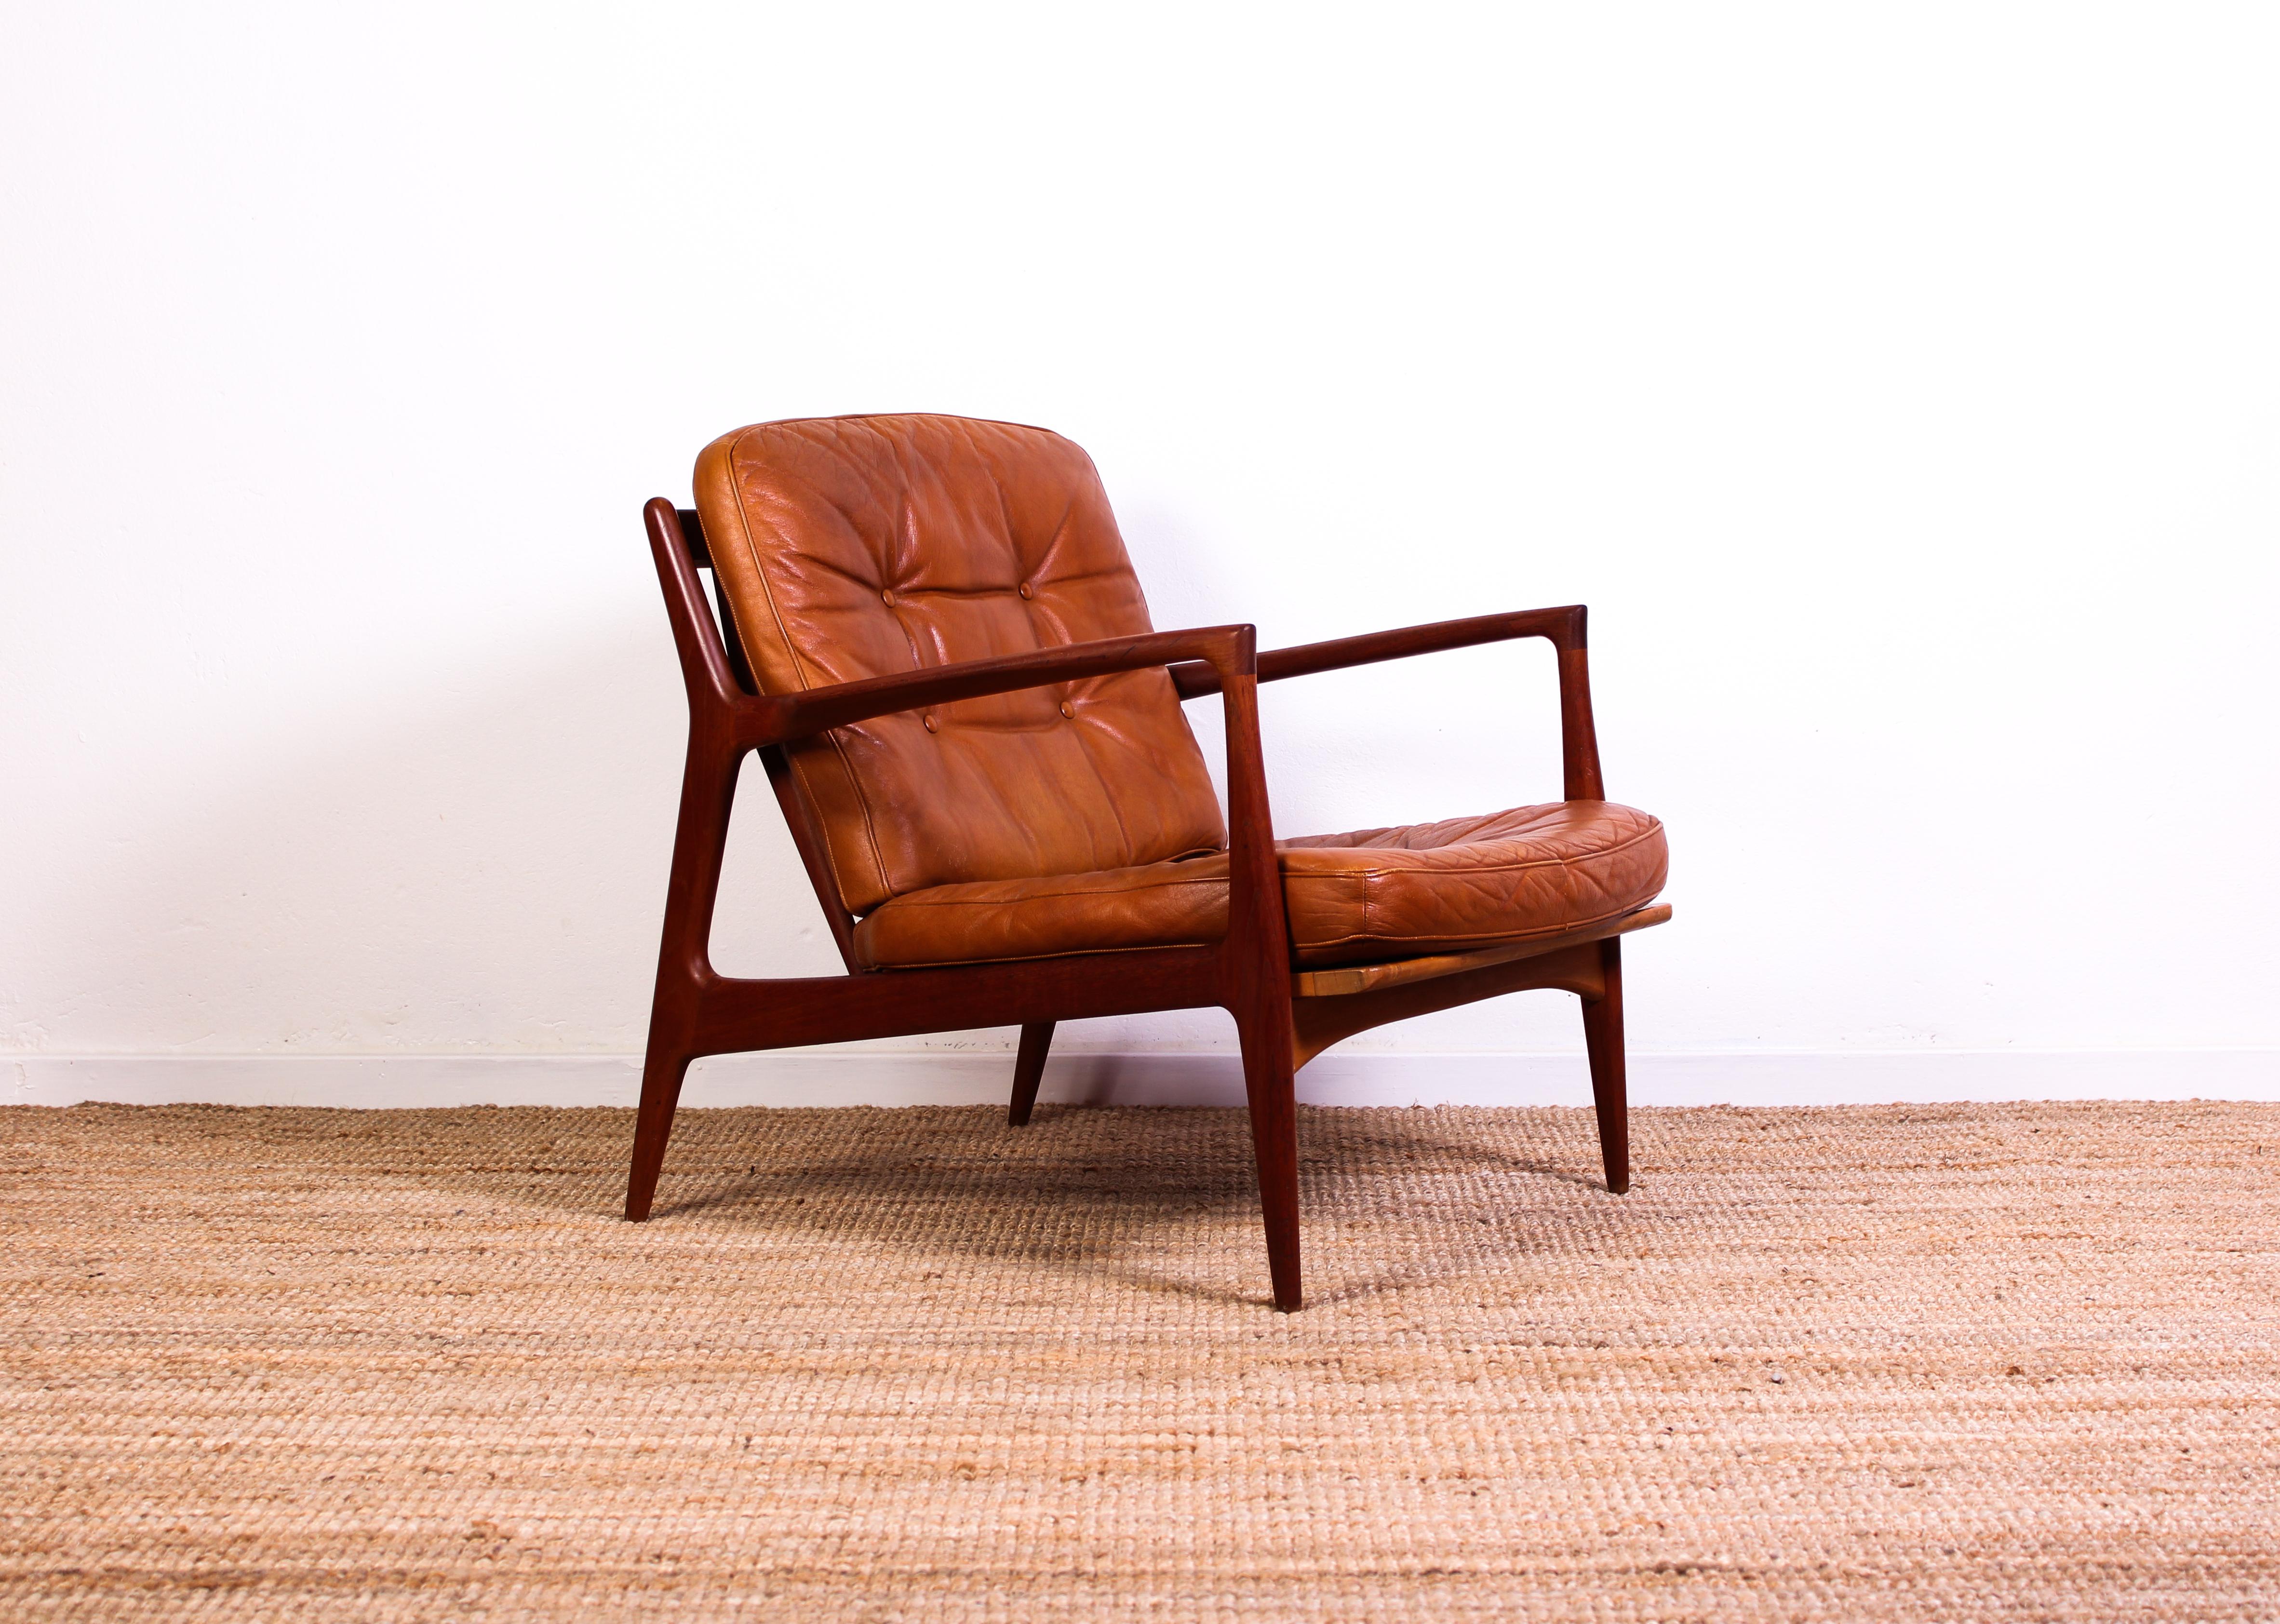 This lounge chair was designed by Ib Kofod-Larsen in 1956 and manufactured by Christian Jensen in Haslev, Denmark. The chair is made out of a solid teak frame with original brown leather cushions. The chair is in excellent vintage condition with